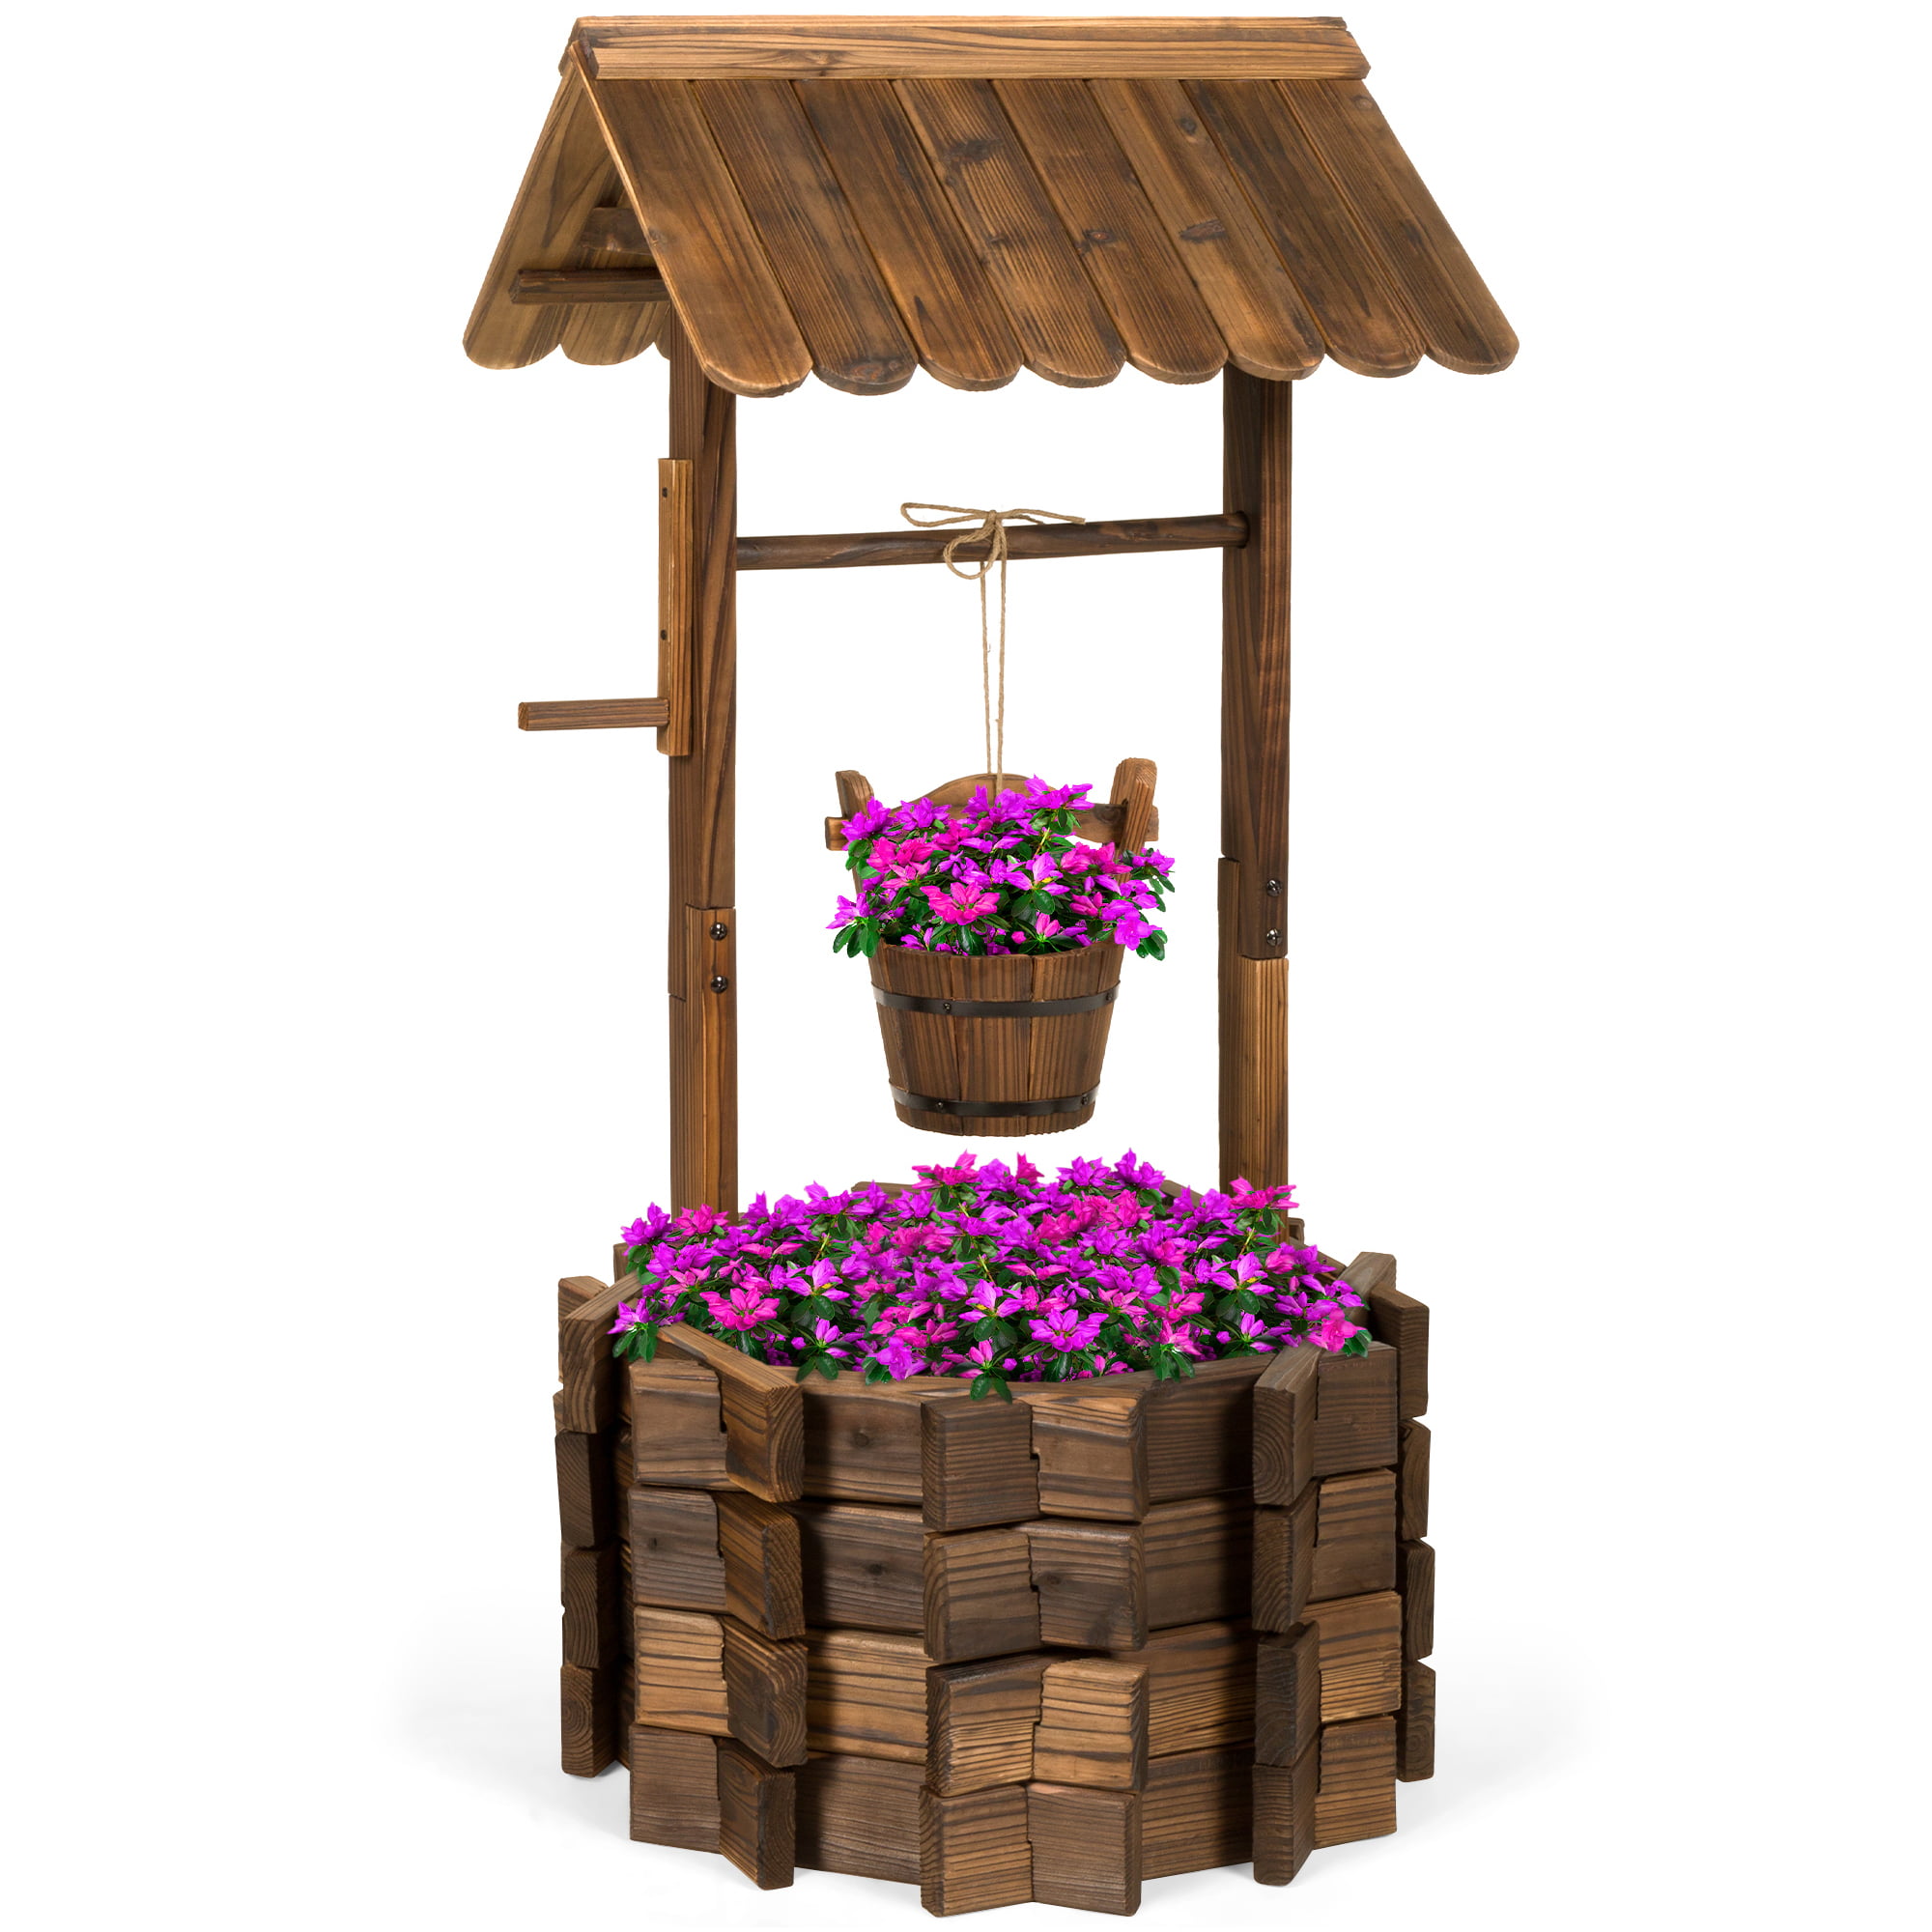 Details about   Rustic Wooden Wishing Well Planter Yard Decoration Fountain With Bucket Outdoor 